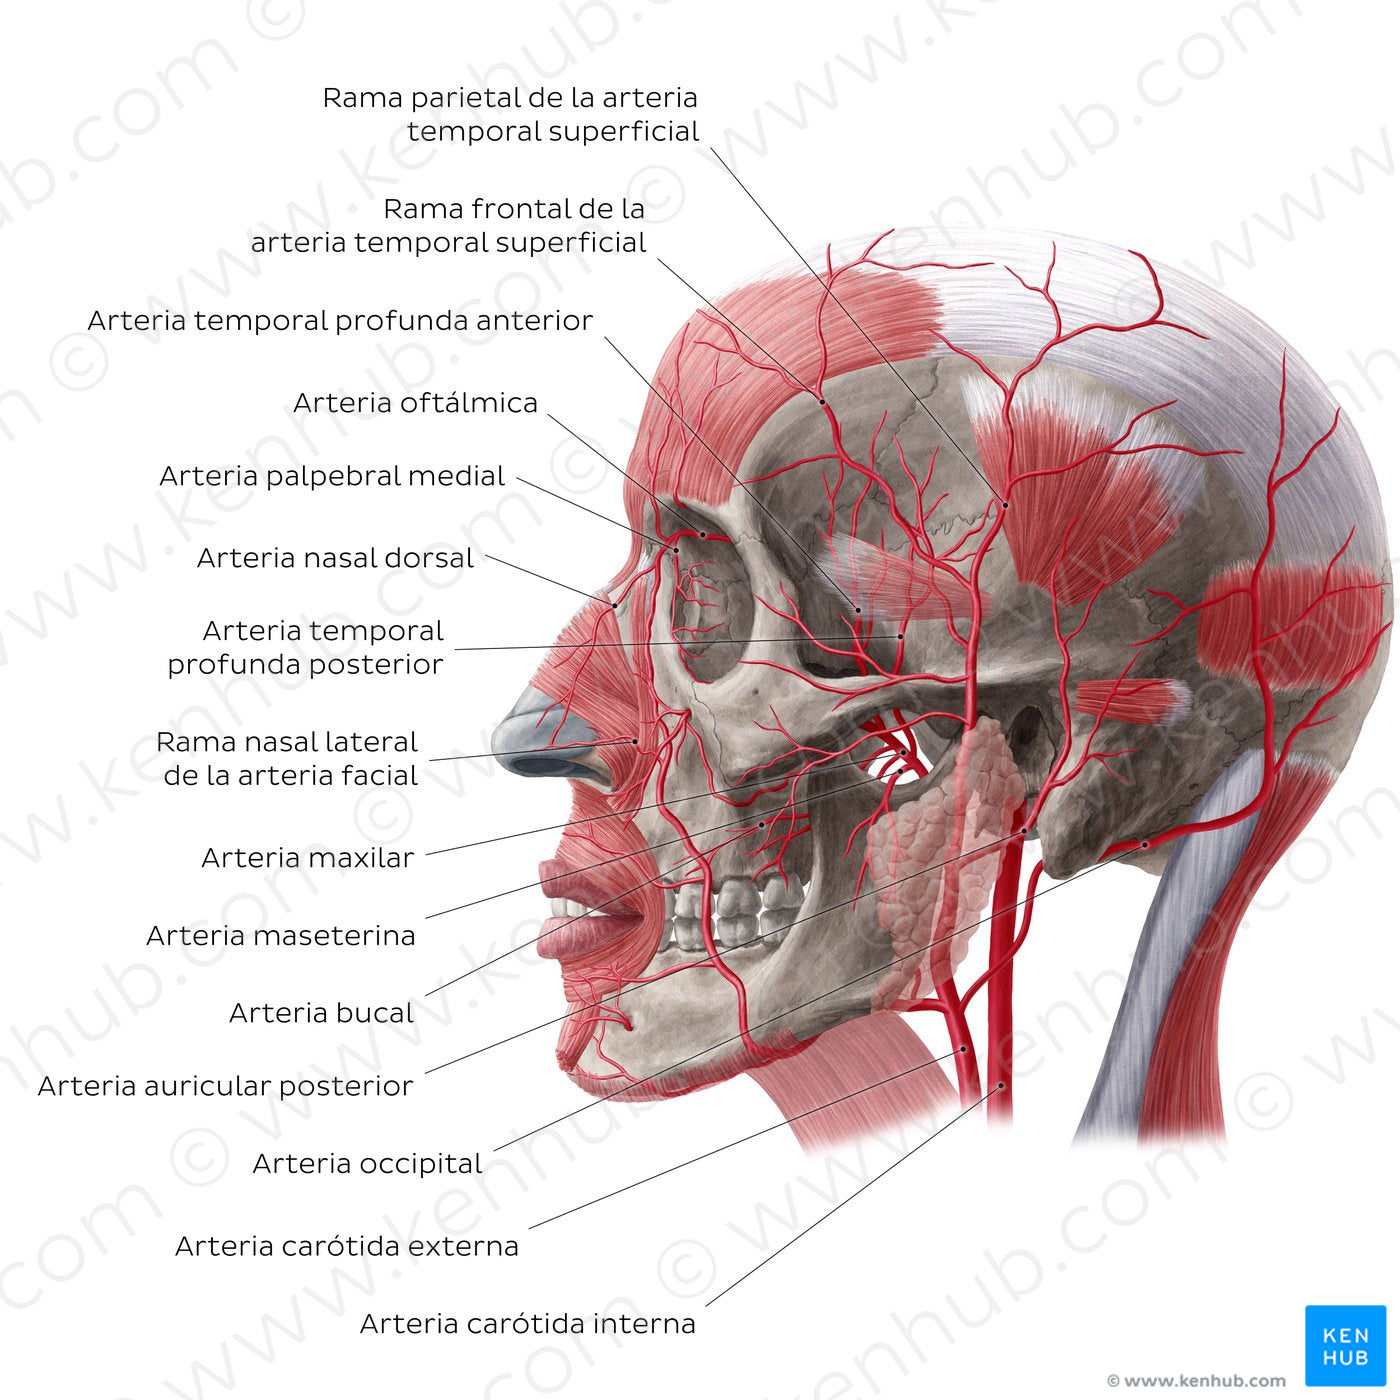 Arteries of face and scalp (Lateral view) (Spanish)